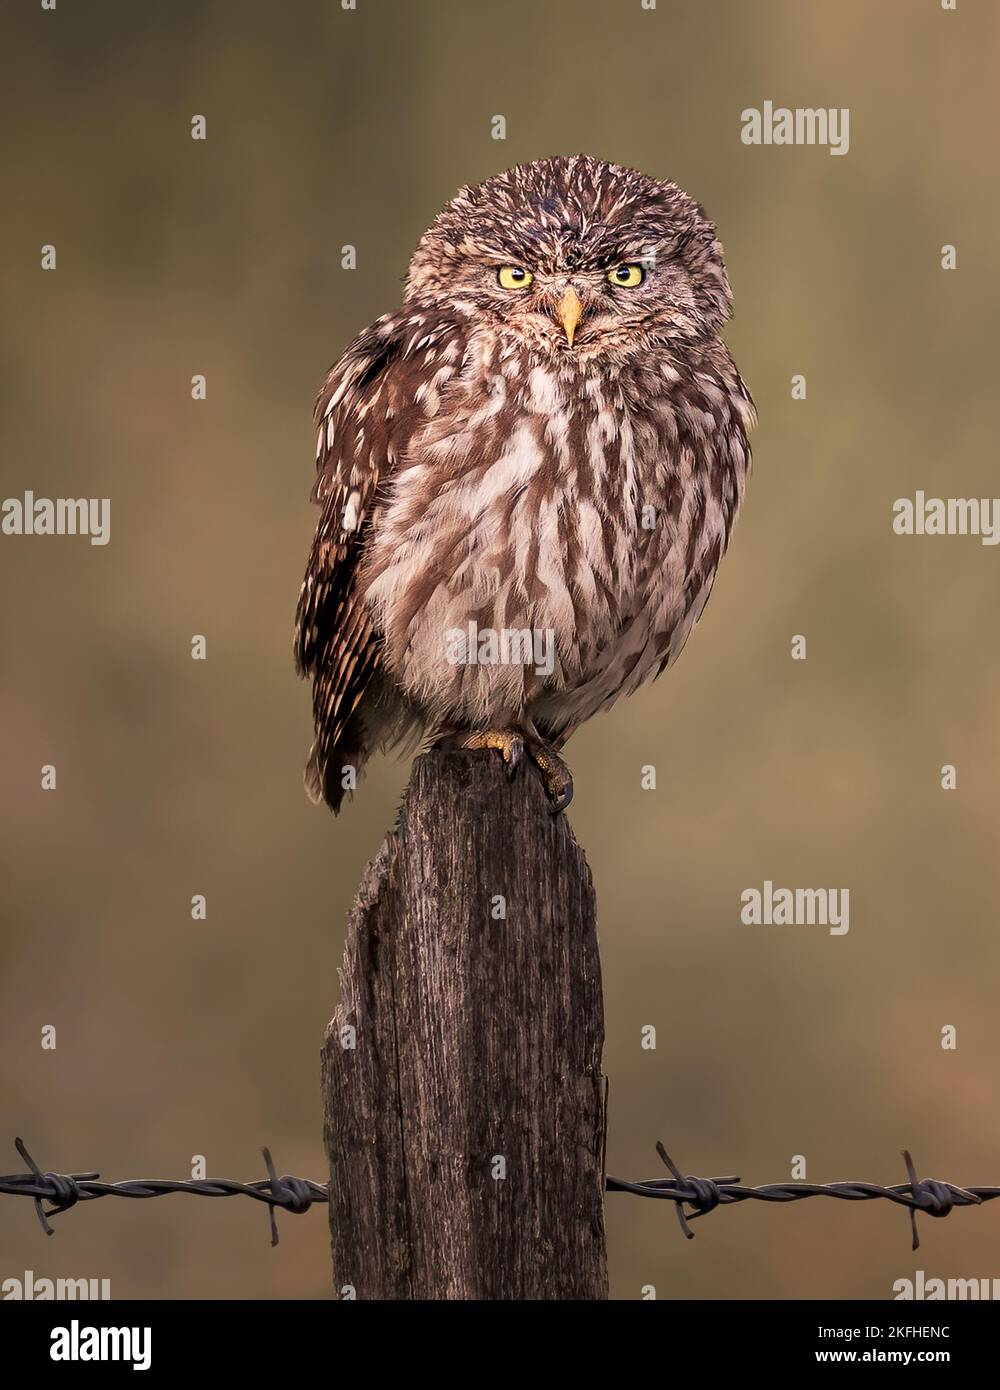 Grumpy little owl perched on a fence post looking at the camera Stock Photo